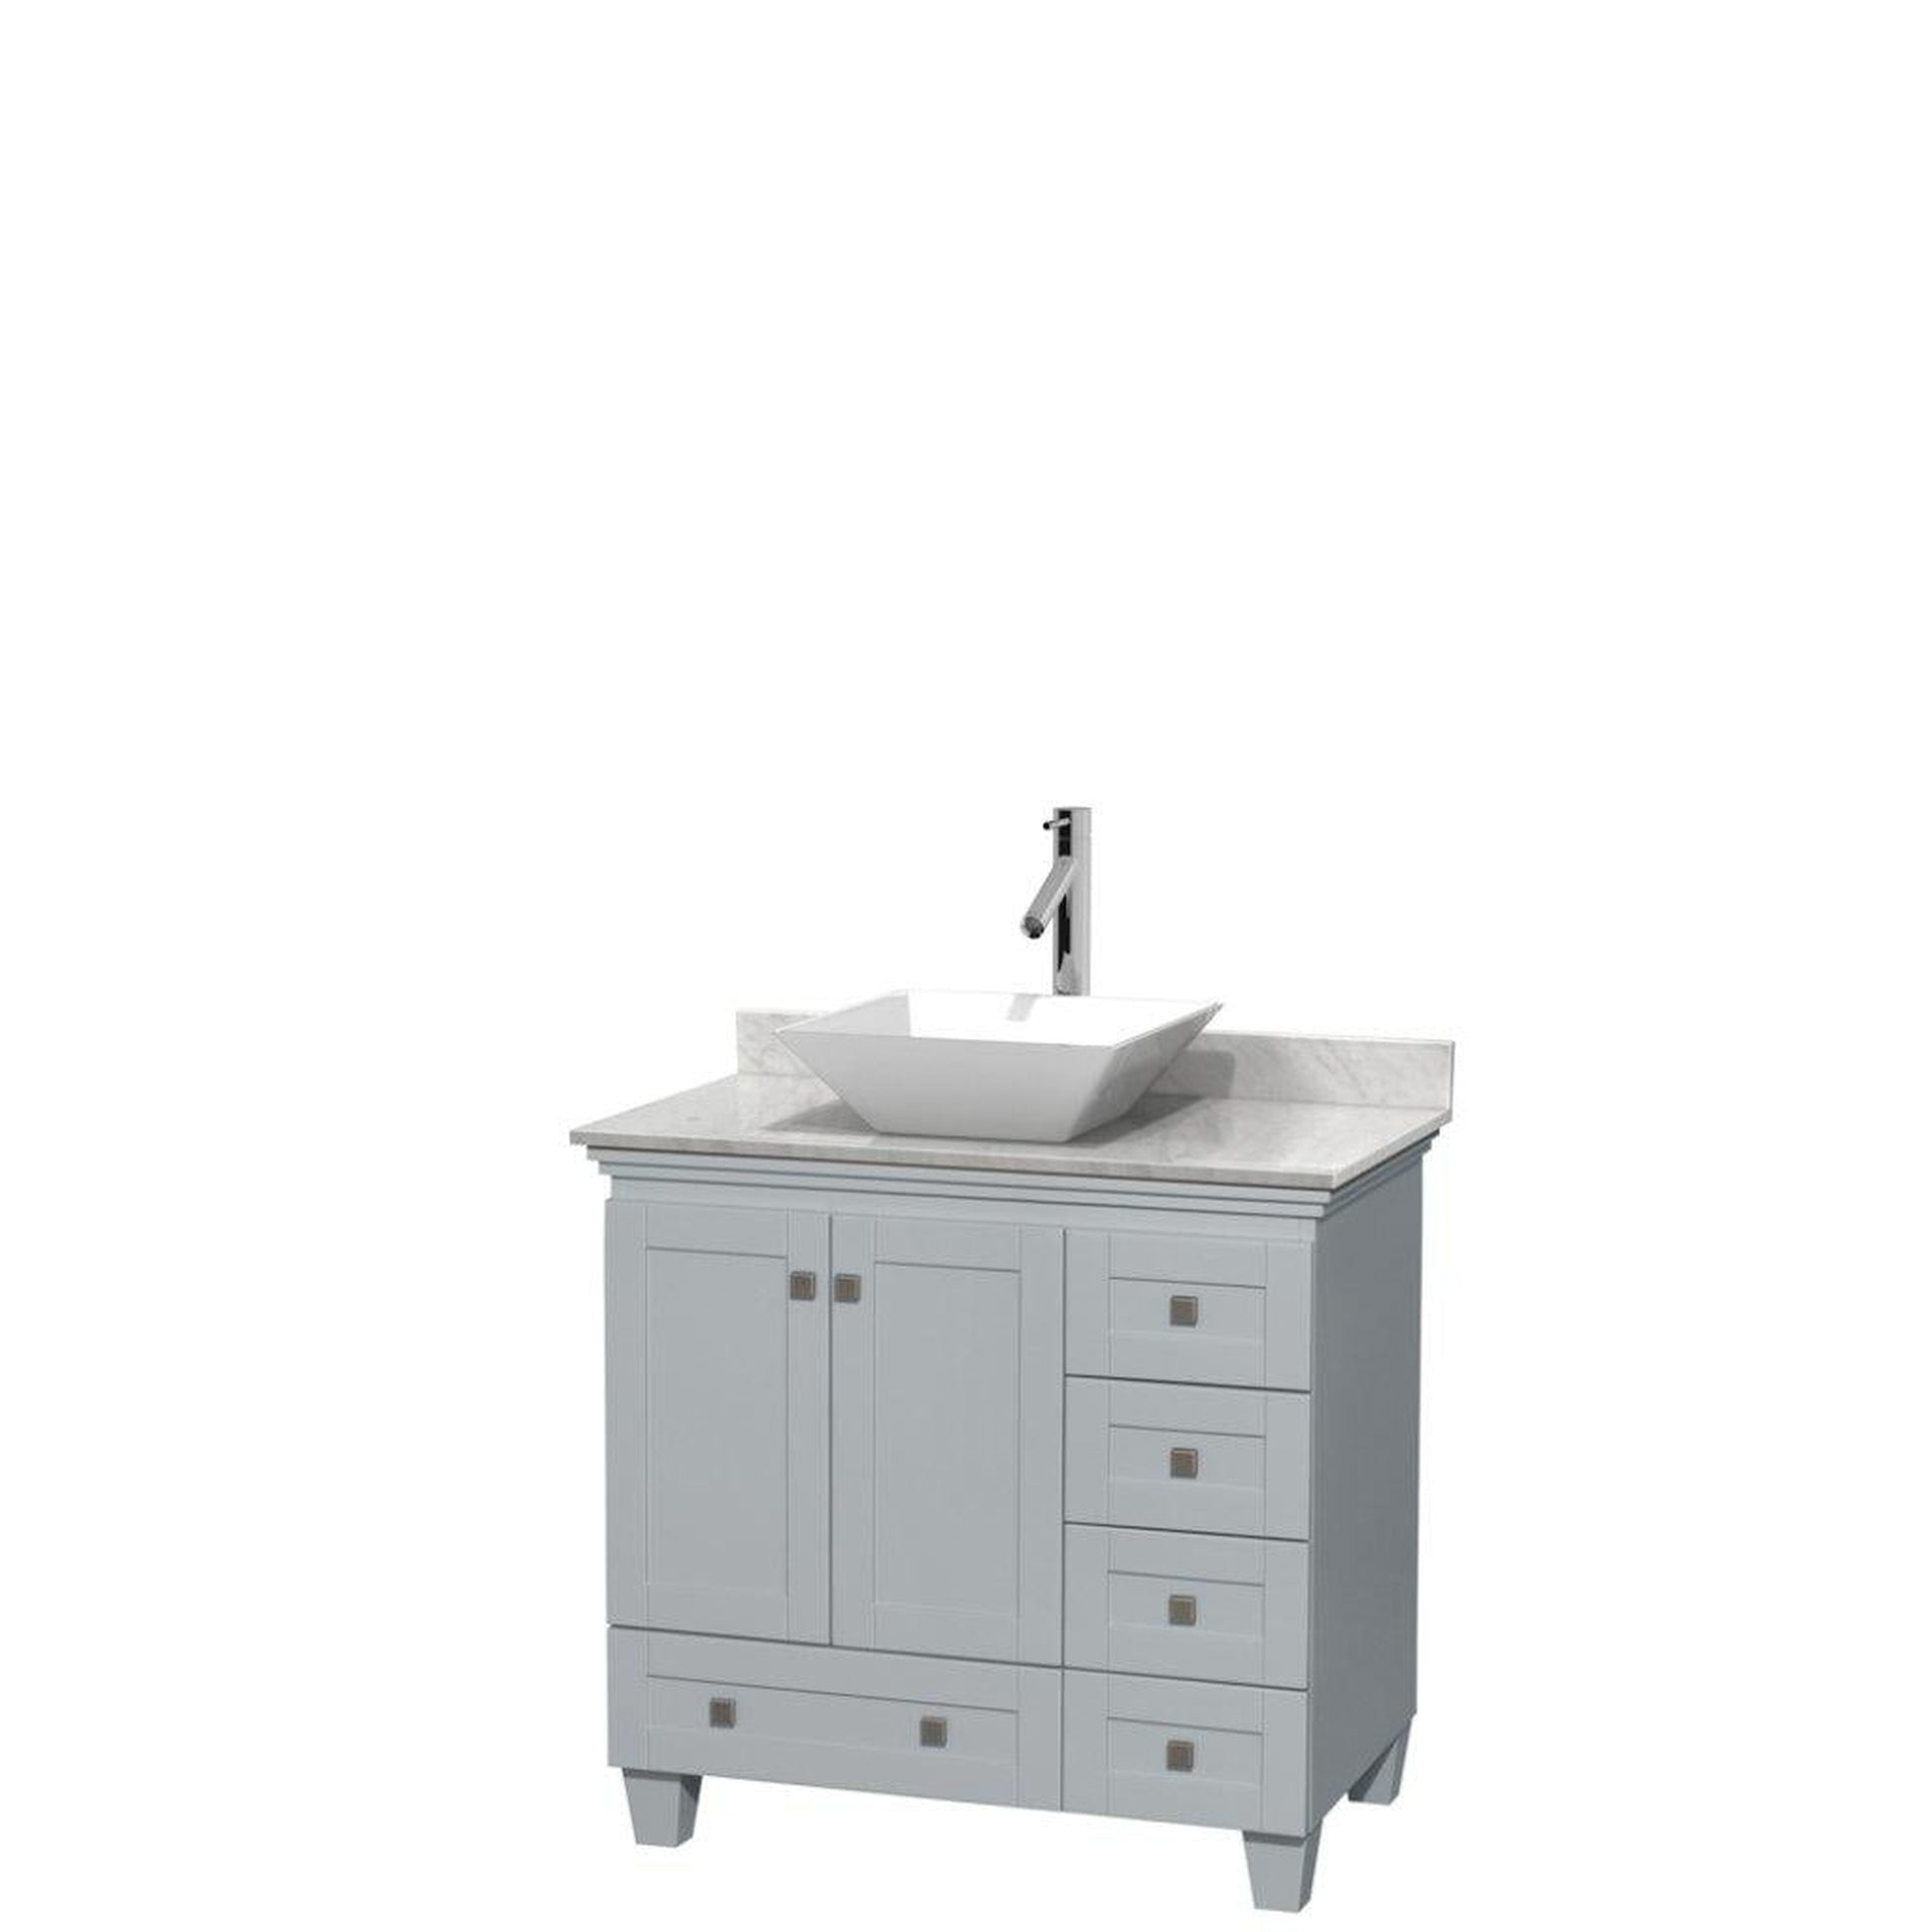 Wyndham Collection Acclaim 36" Single Bathroom Oyster Gray Vanity With White Carrara Marble Countertop And Pyra White Porcelain Sink